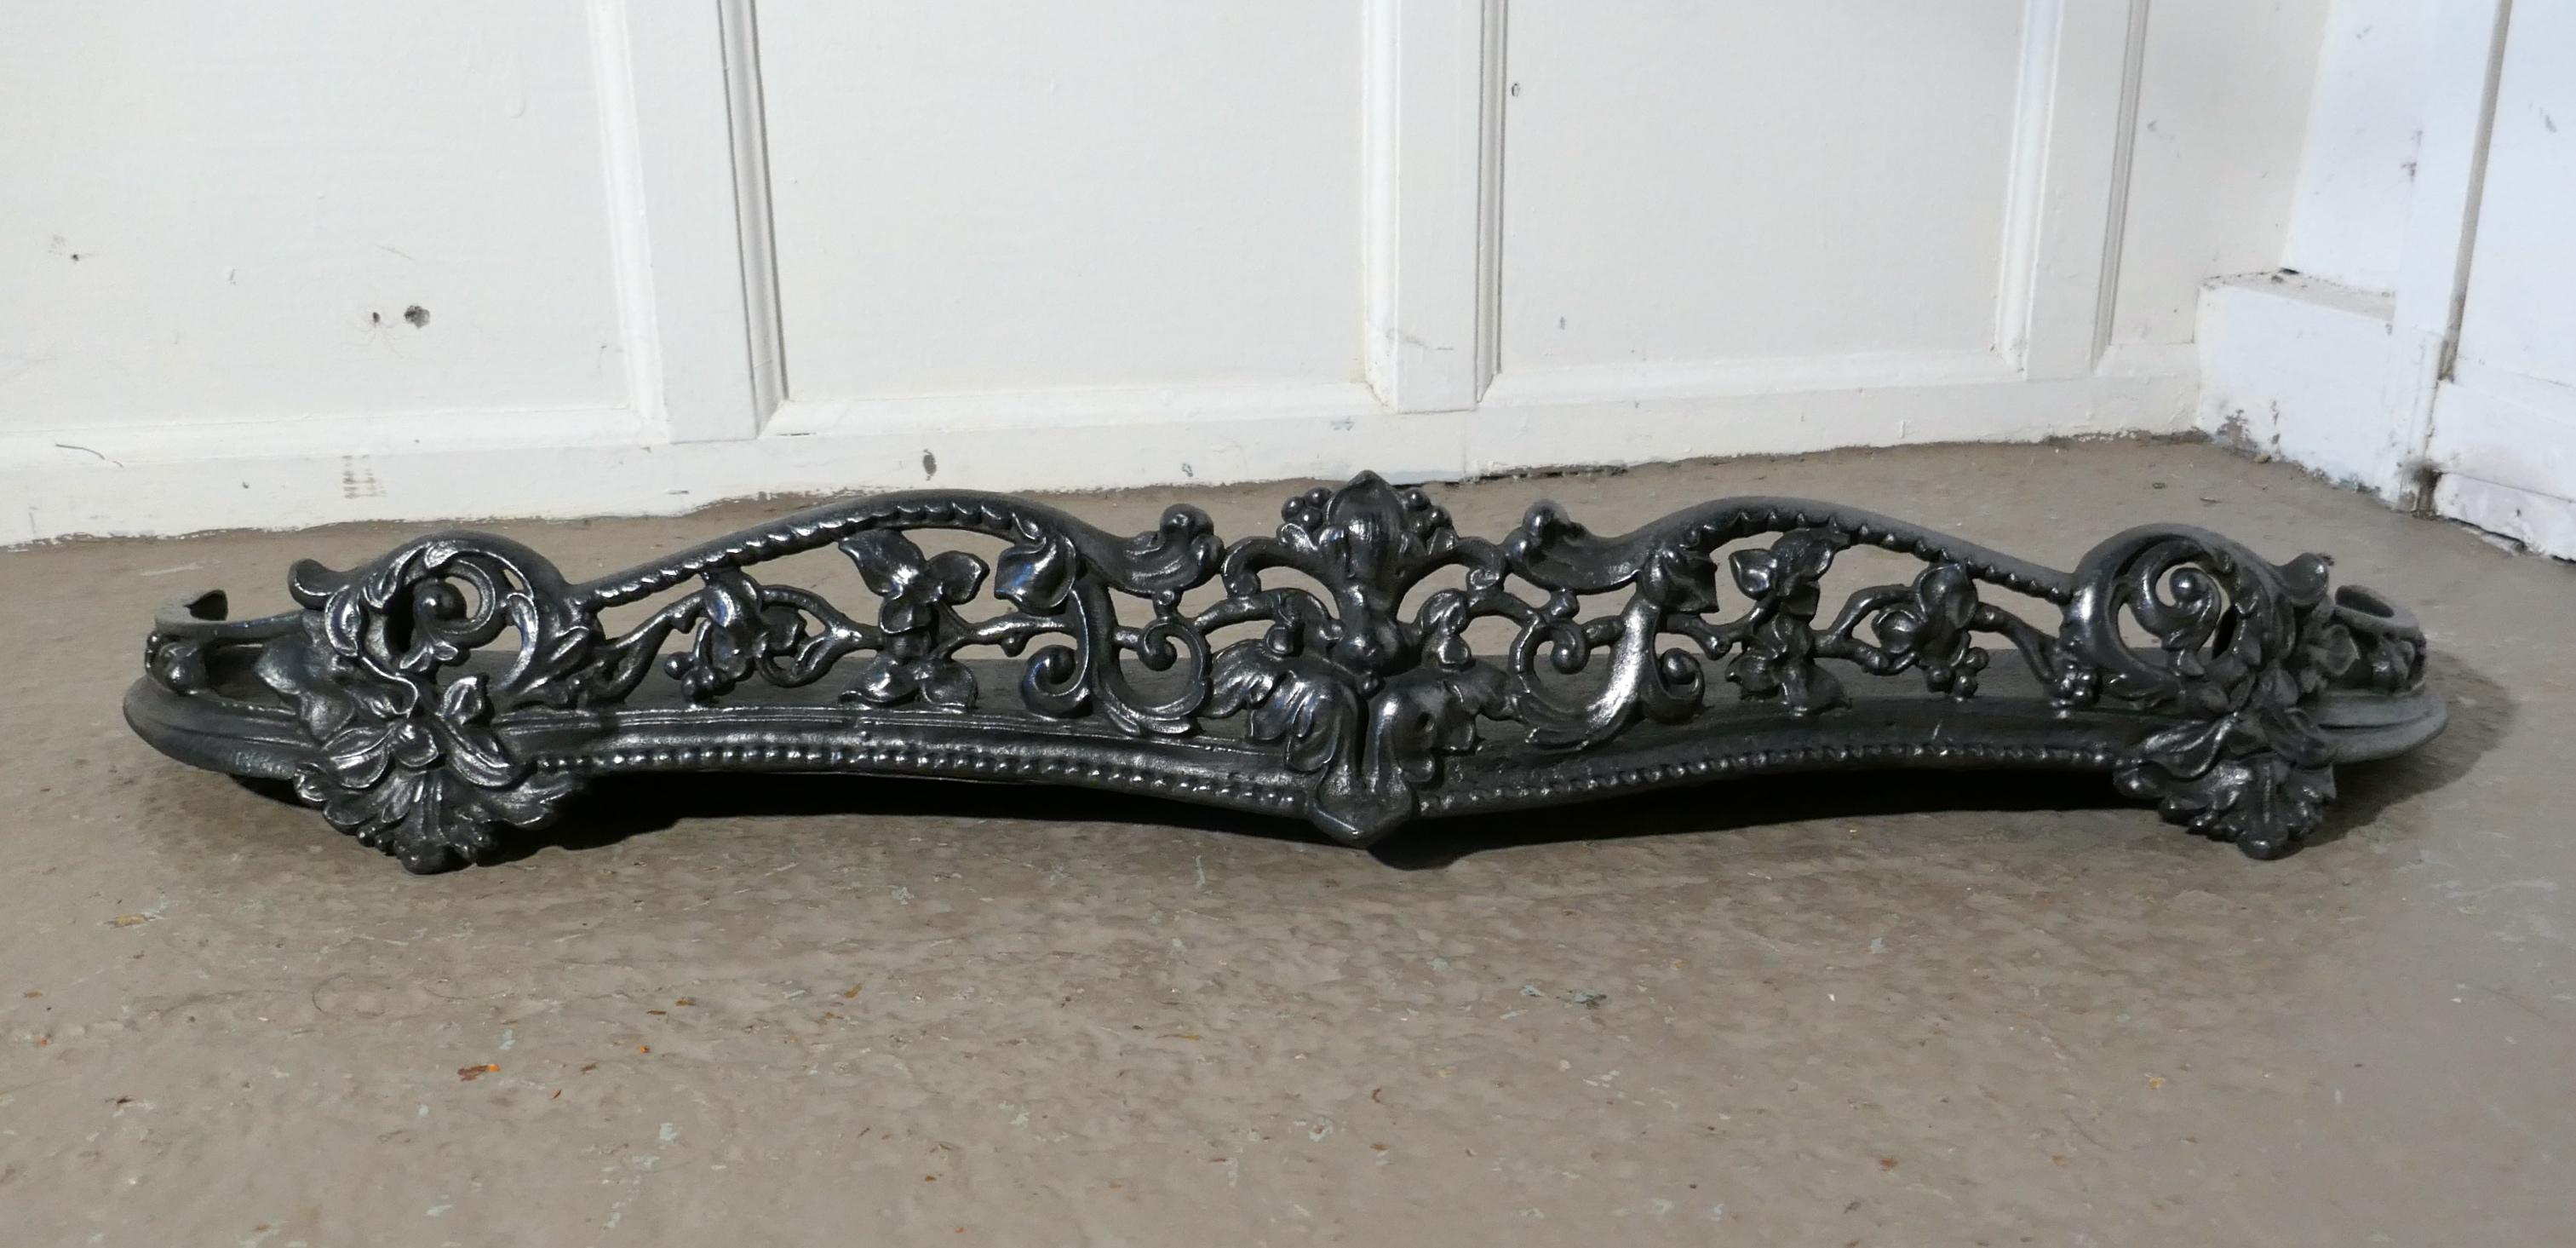 Victorian Art Nouveau Cast Iron Fender or dog grate

This is a Good Victorian Fender it is best quality and heavy, fenders like this were known a Dog Grates as they serve to rest the fire tools and keep any rolling ash in check, and this one is a